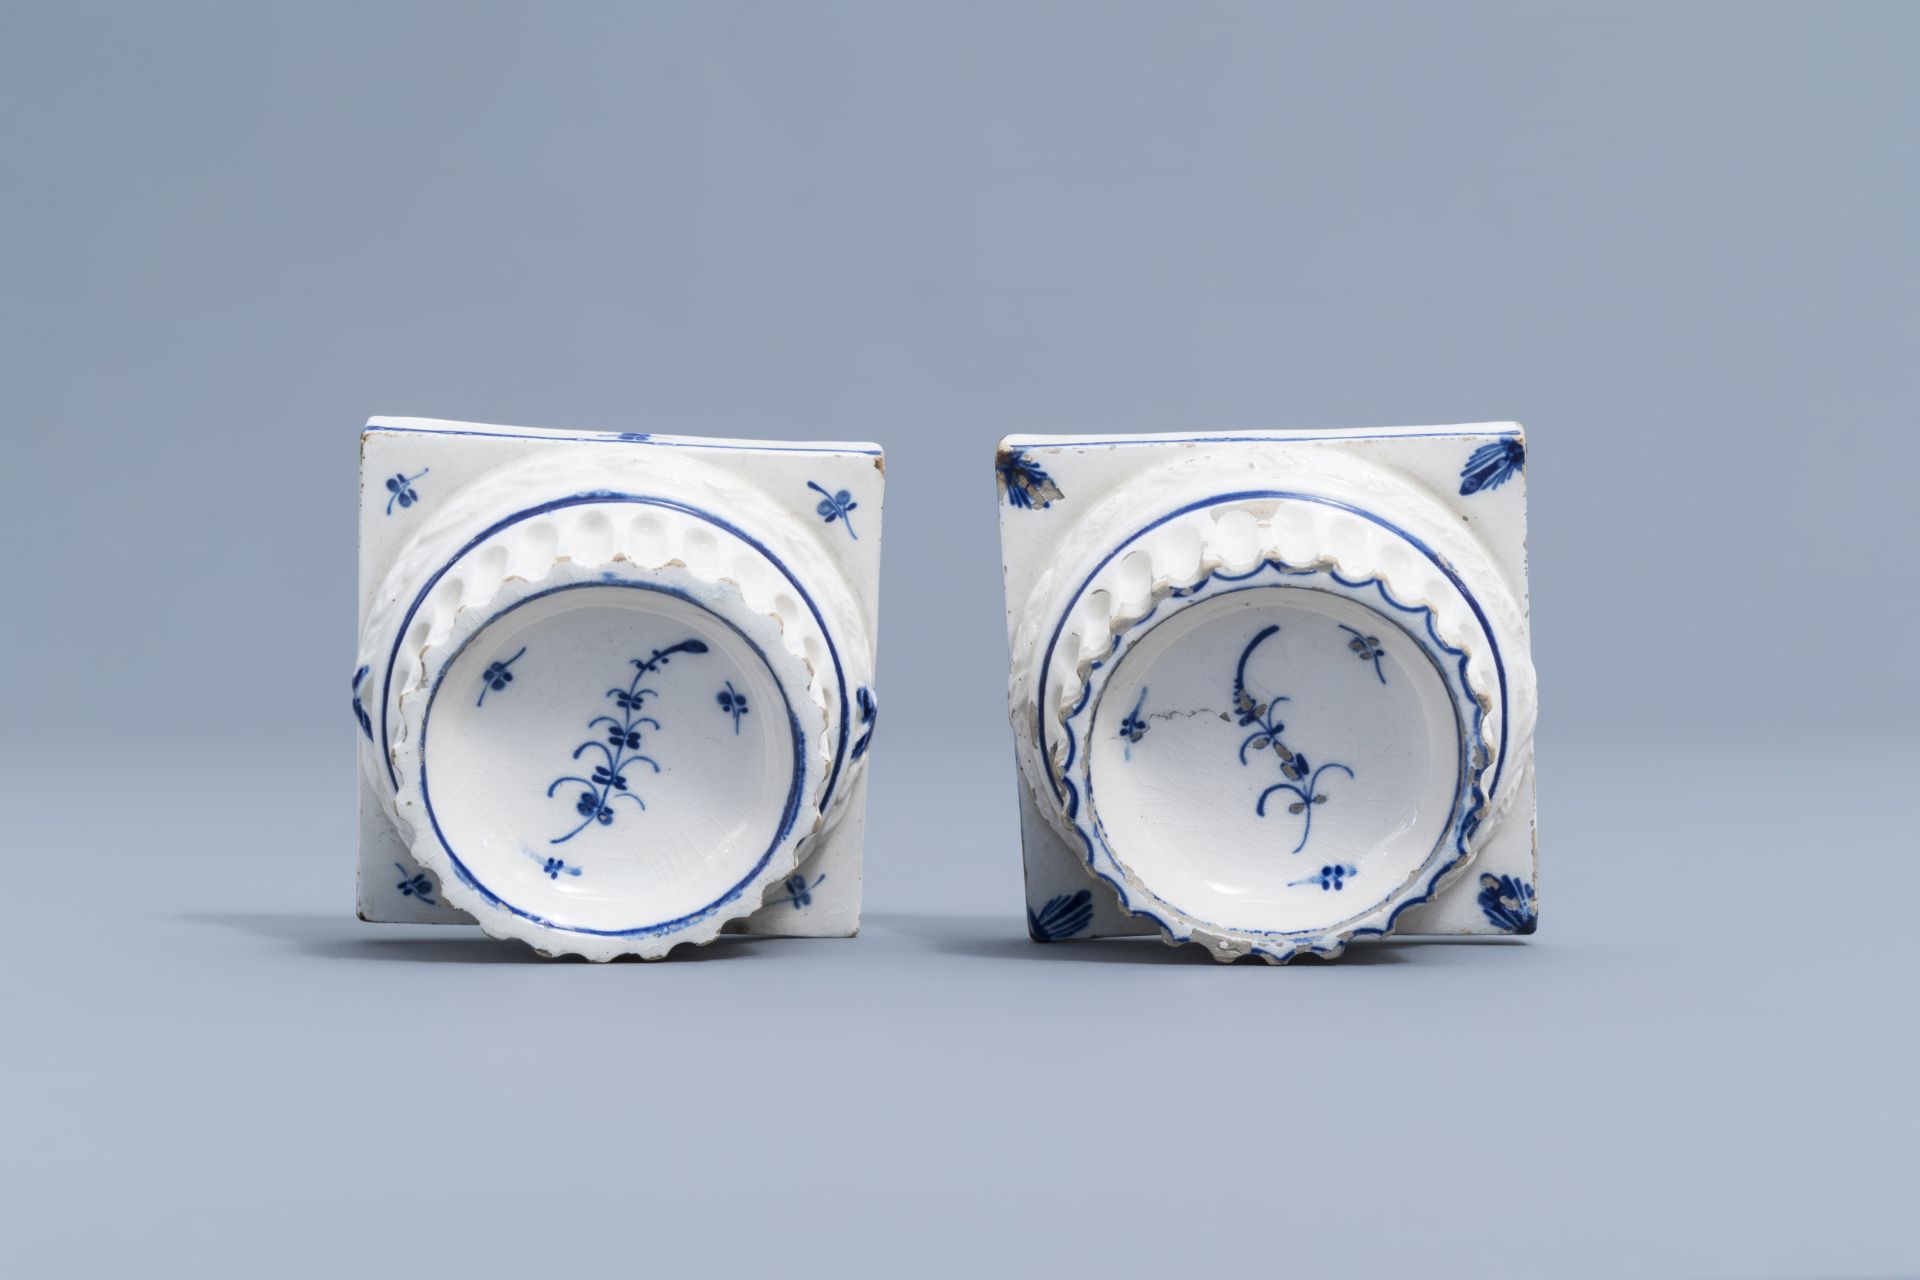 A pair of bue and white faience fine salts and five cream jars, Luxemburg and France, 18th/19th C. - Image 43 of 46